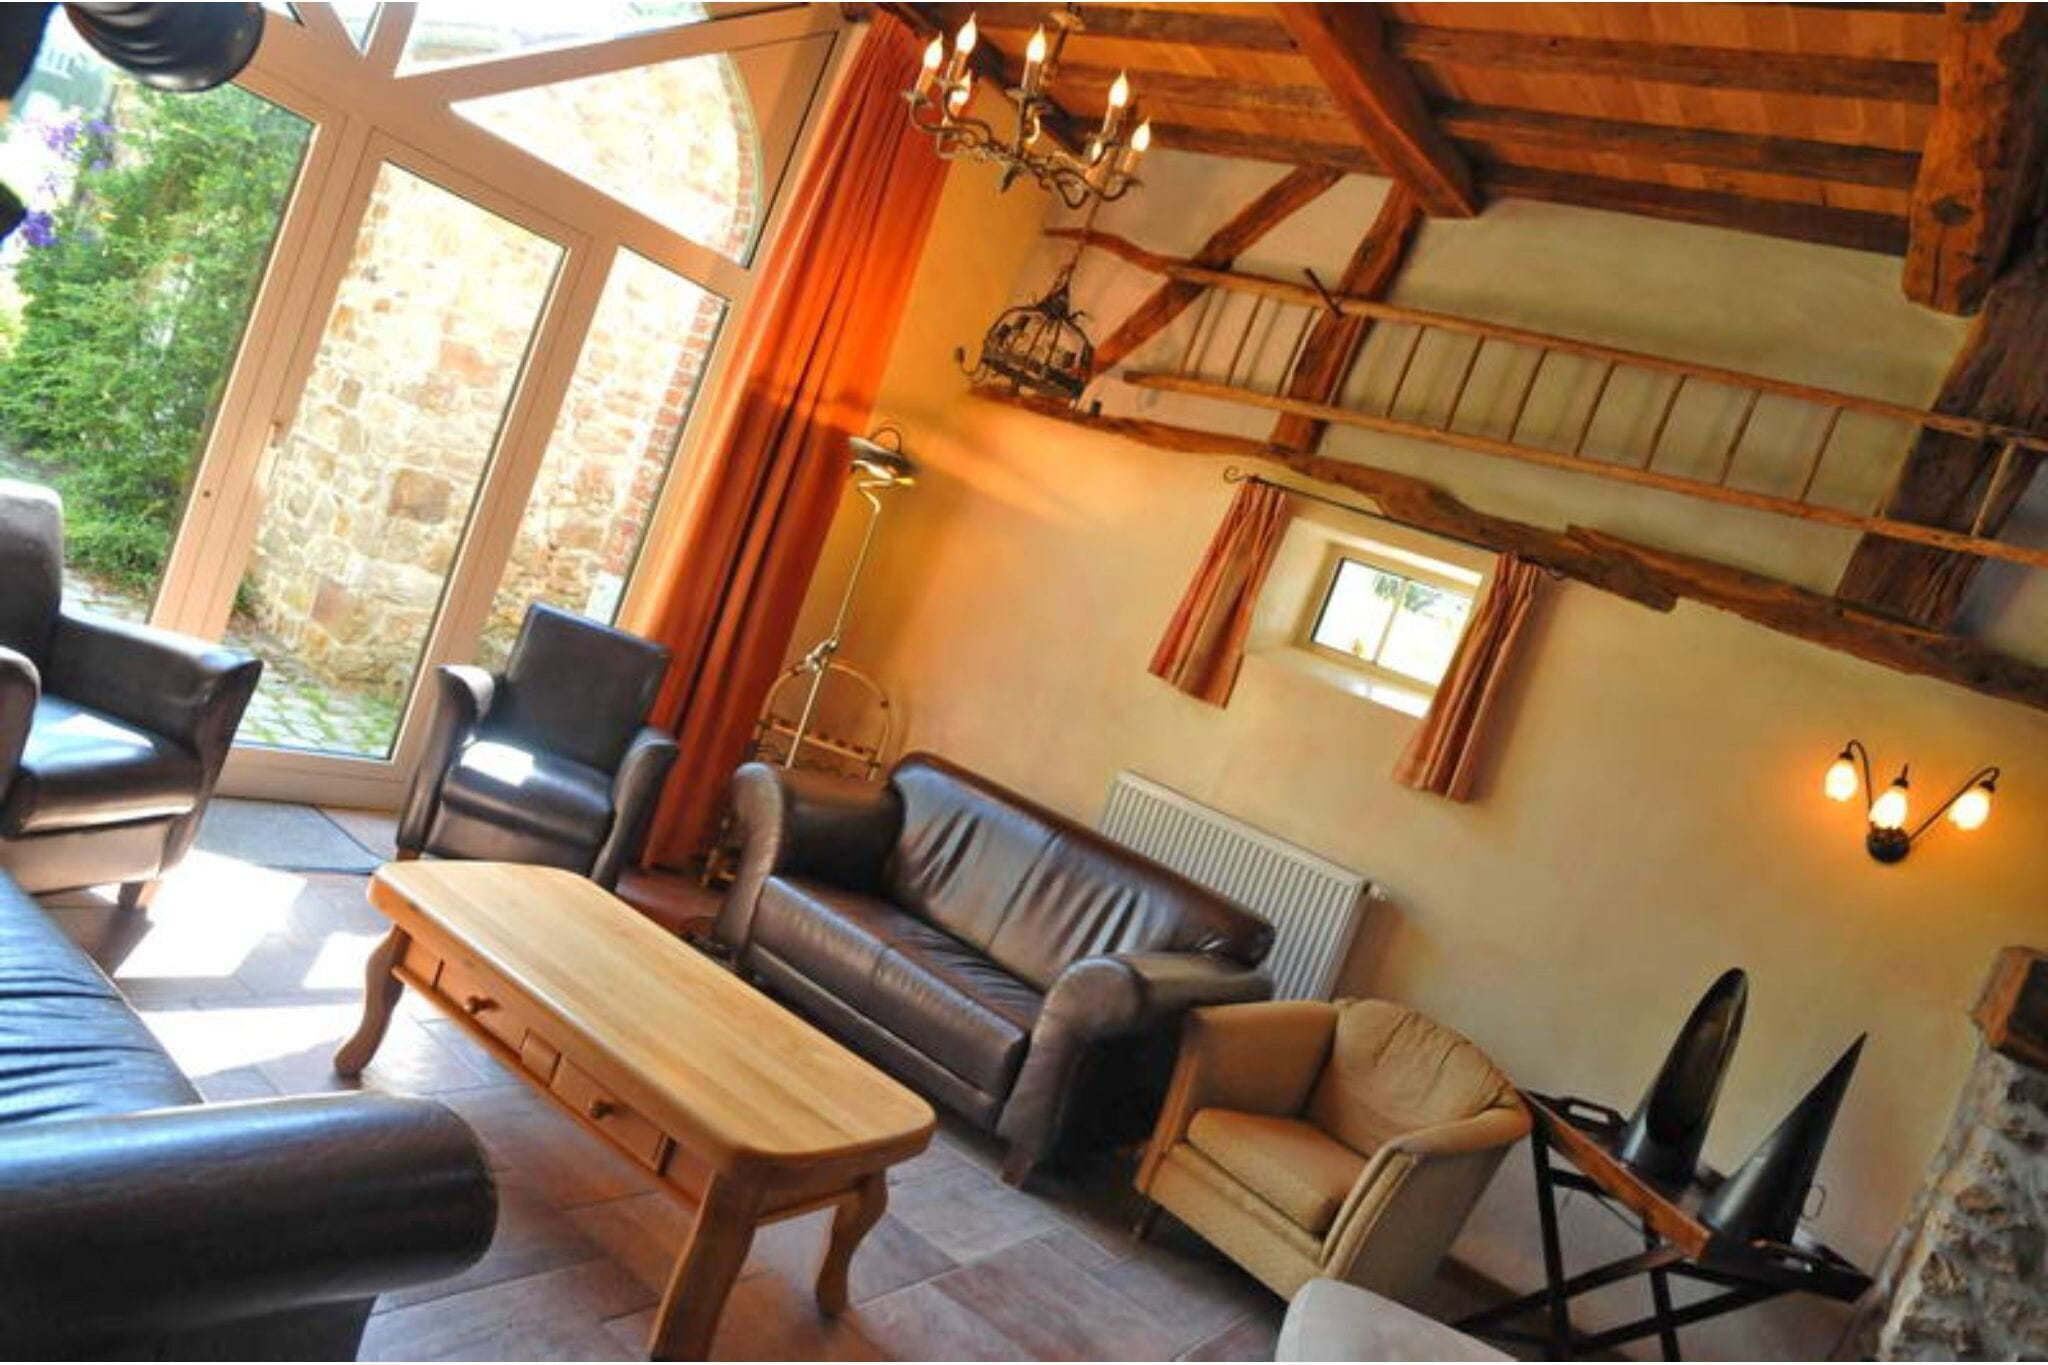 Renovated farmhouse, completely furnished for groups of up to 32 people